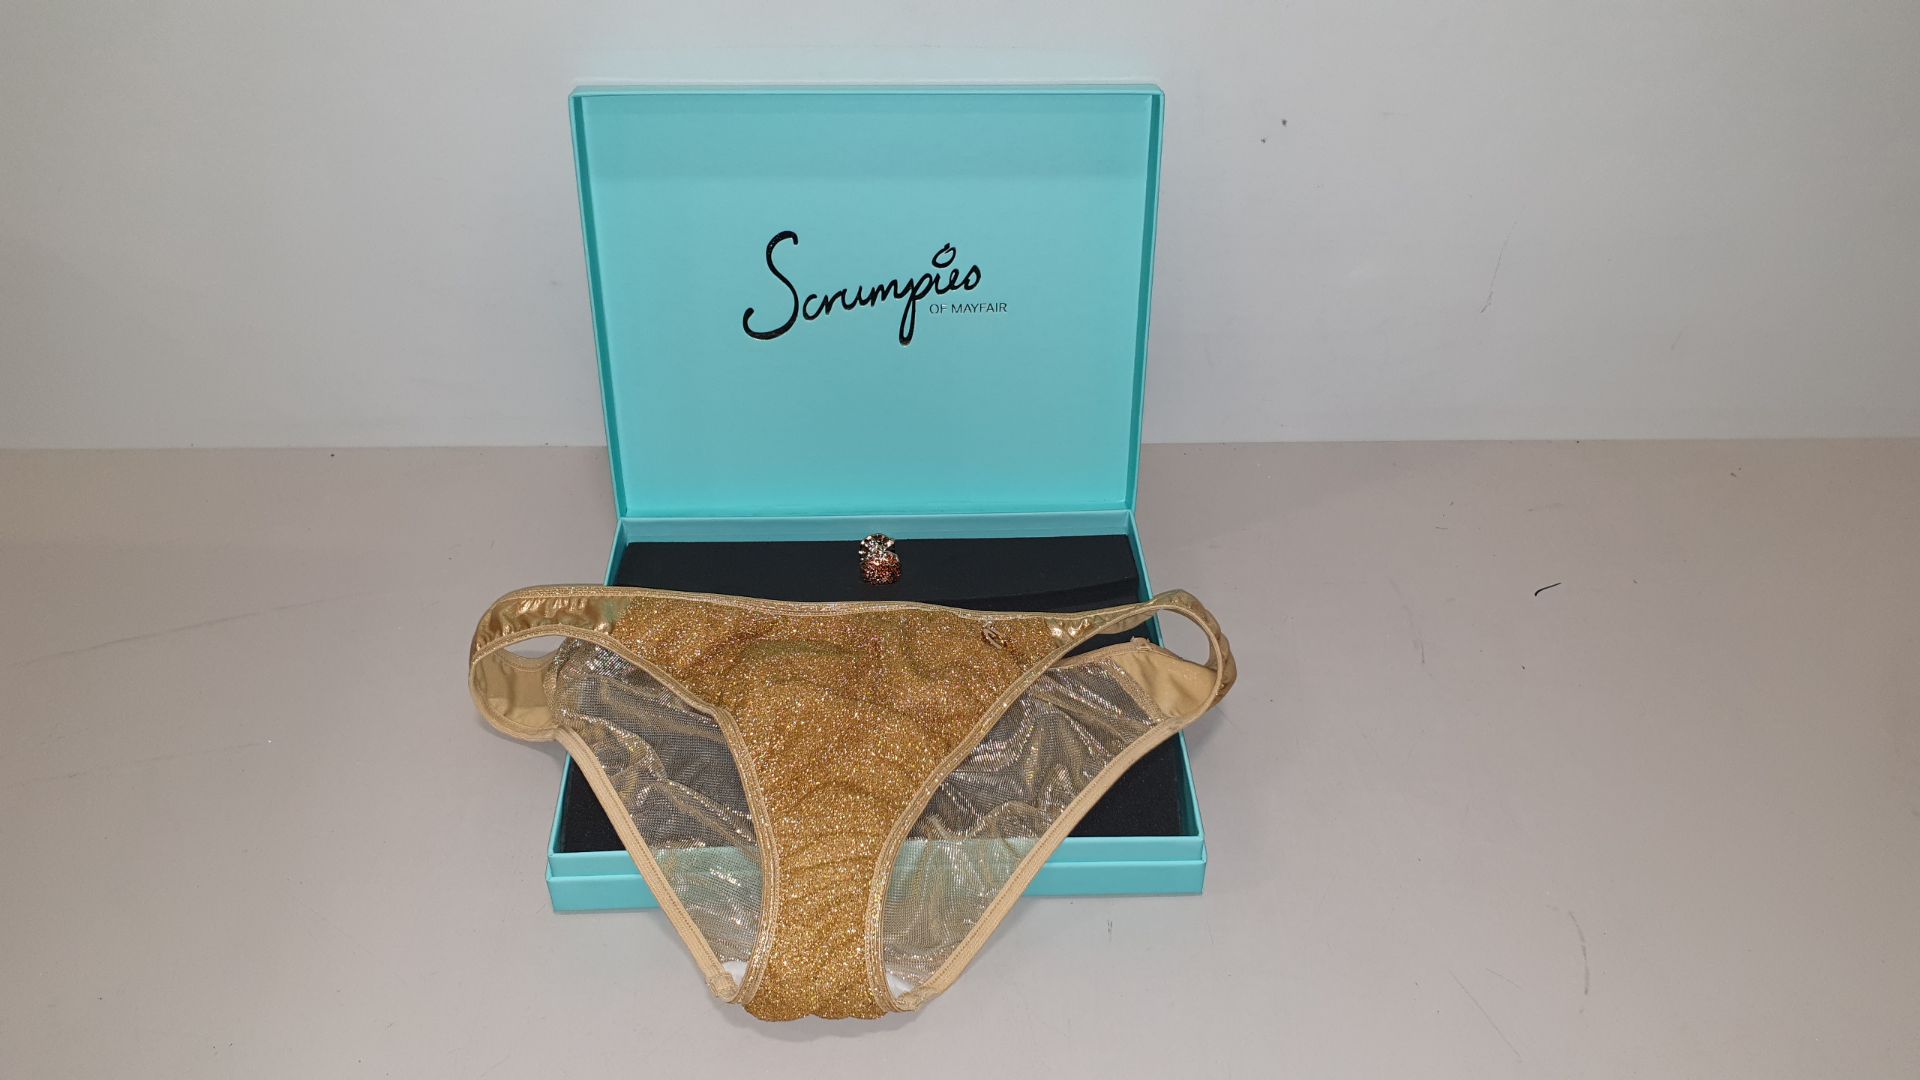 50 X SCRUMPIES OF MAYFAIR GOLDEN DELICIOUS TANGA BRIEFS - SIZES 12-14 (3-4) - WITH BAG OF 50